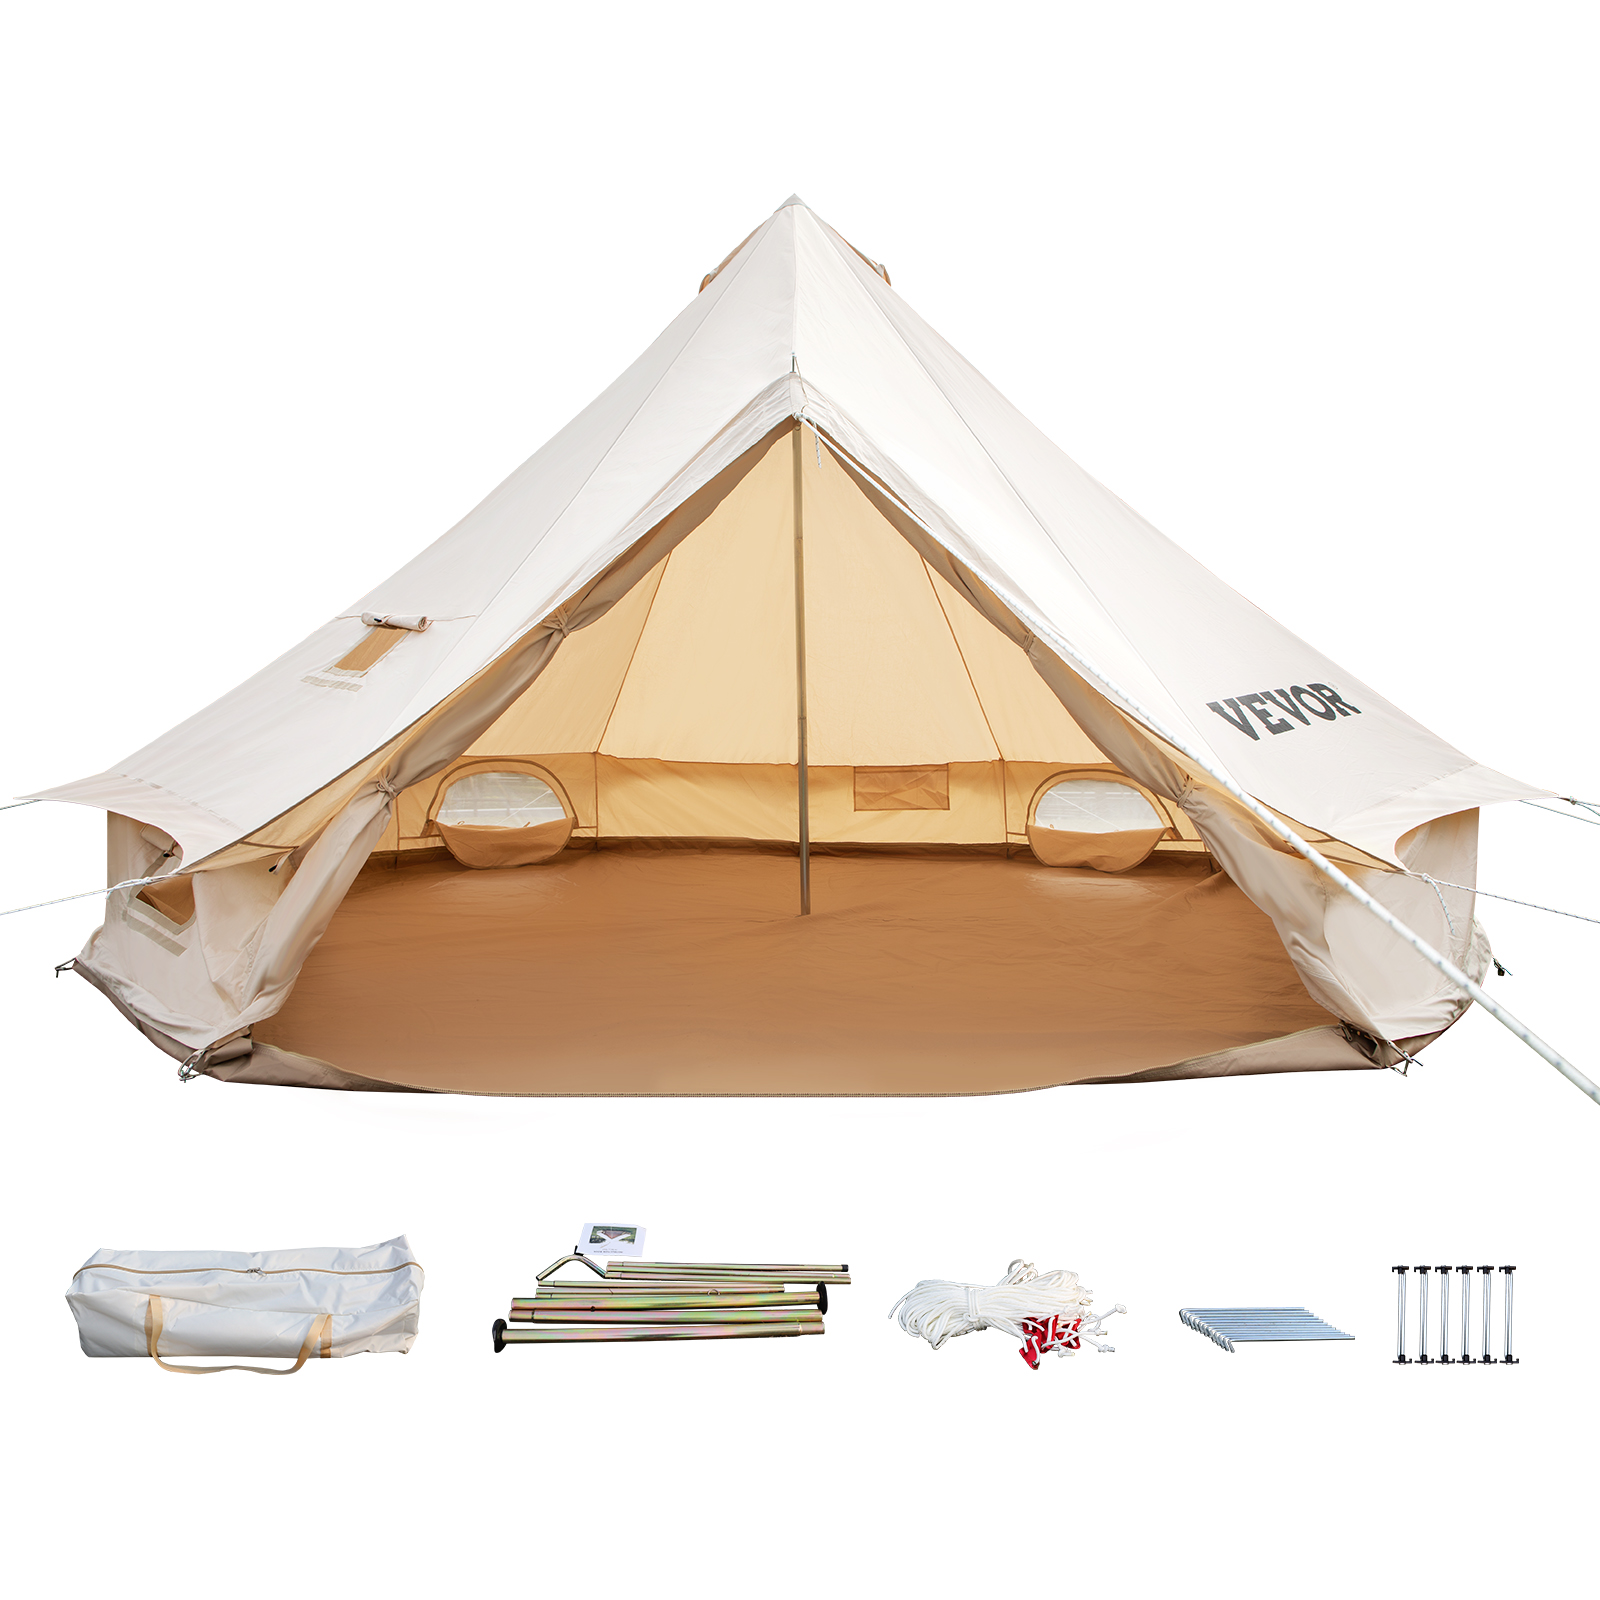 VEVOR Canvas Bell Tent, Waterproof & Breathable 100% Cotton Retro and Luxury Yurt with Stove